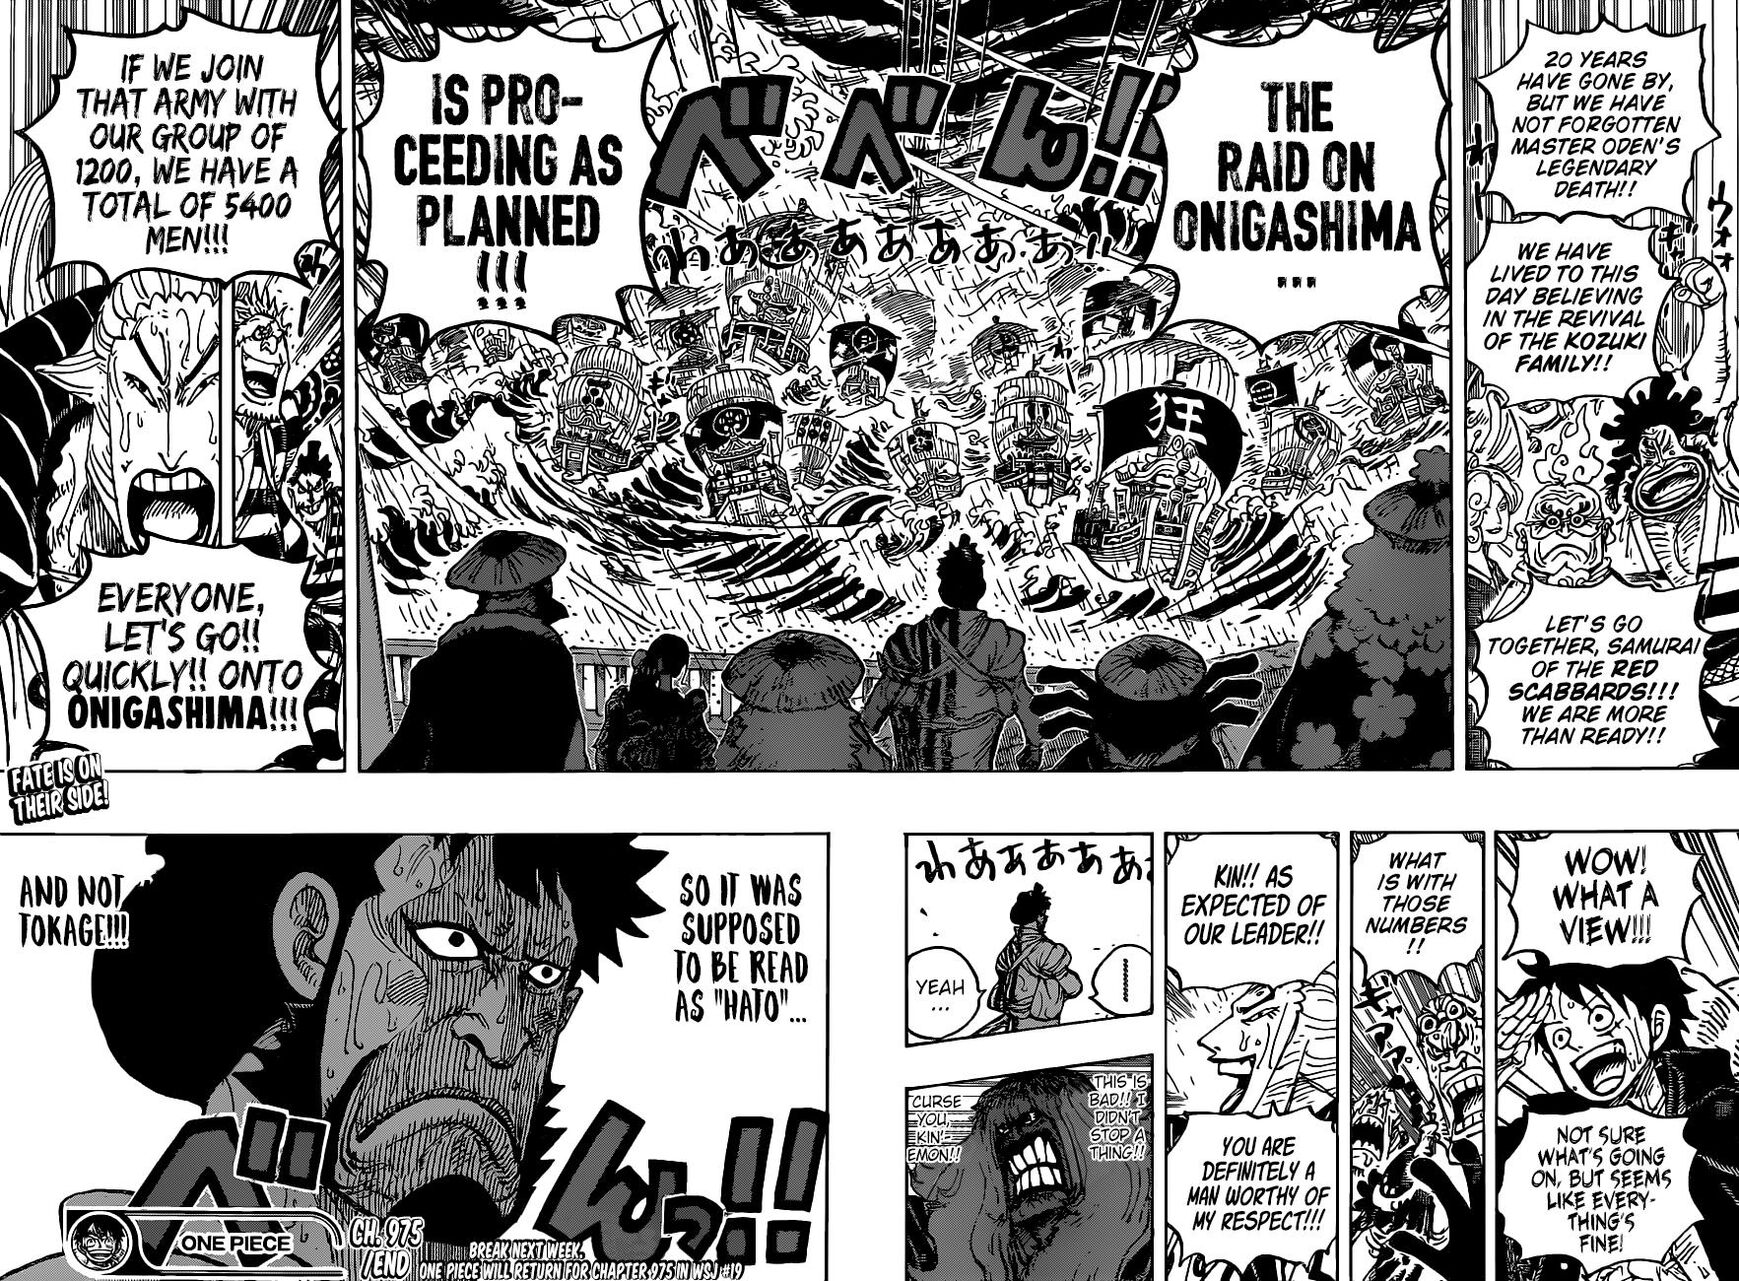 One Piece, Chapter 975 - Vol.69 Ch.975 image 15